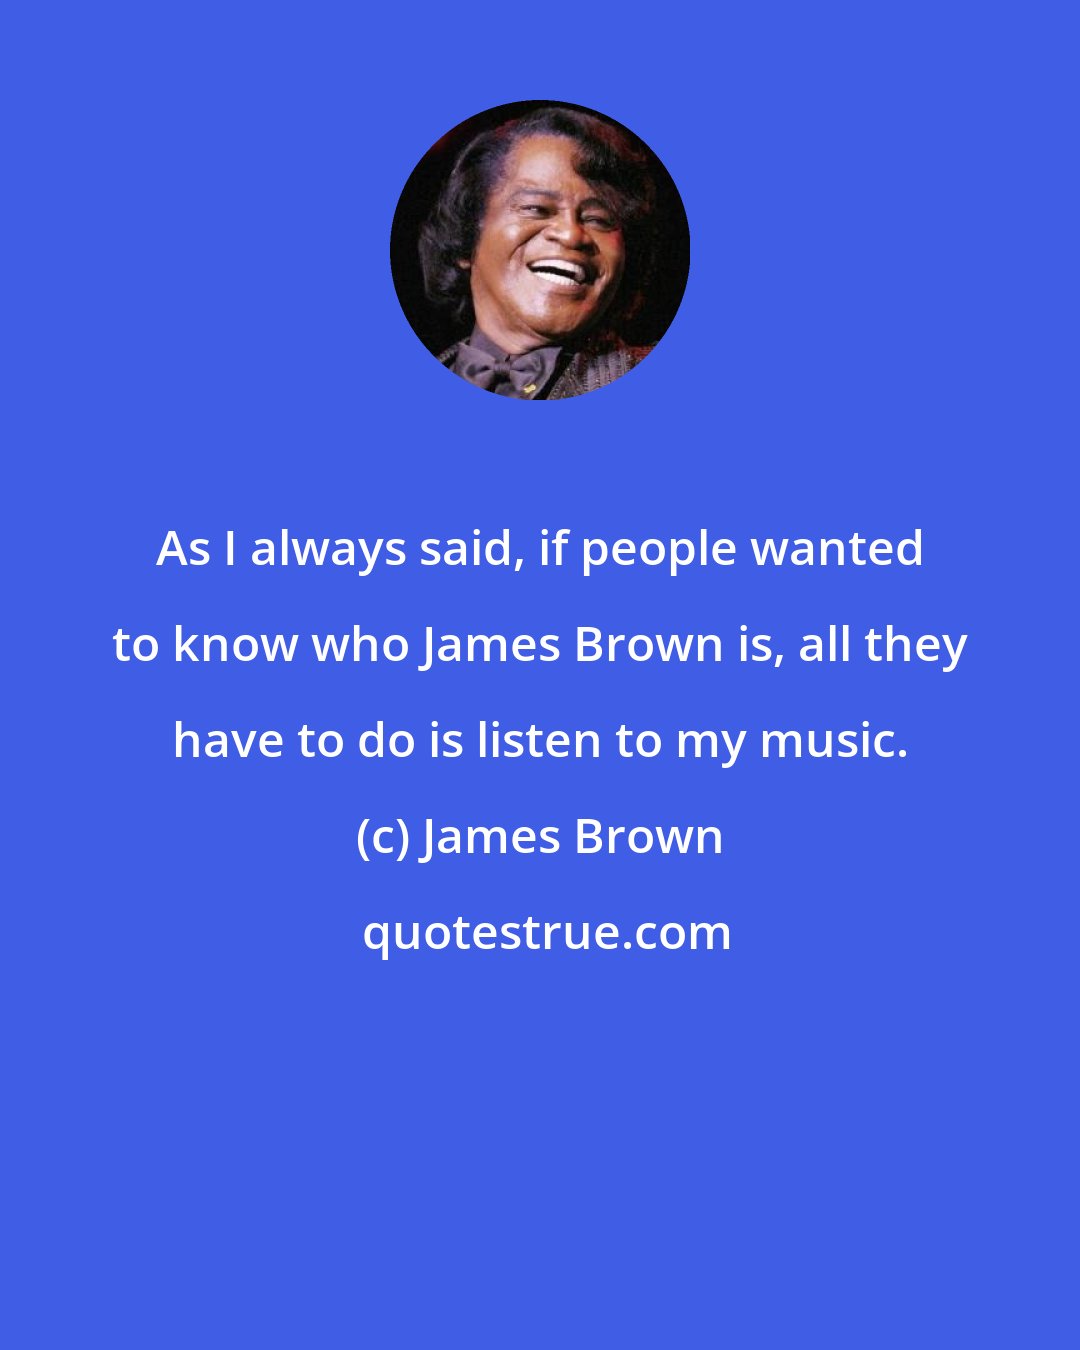 James Brown: As I always said, if people wanted to know who James Brown is, all they have to do is listen to my music.